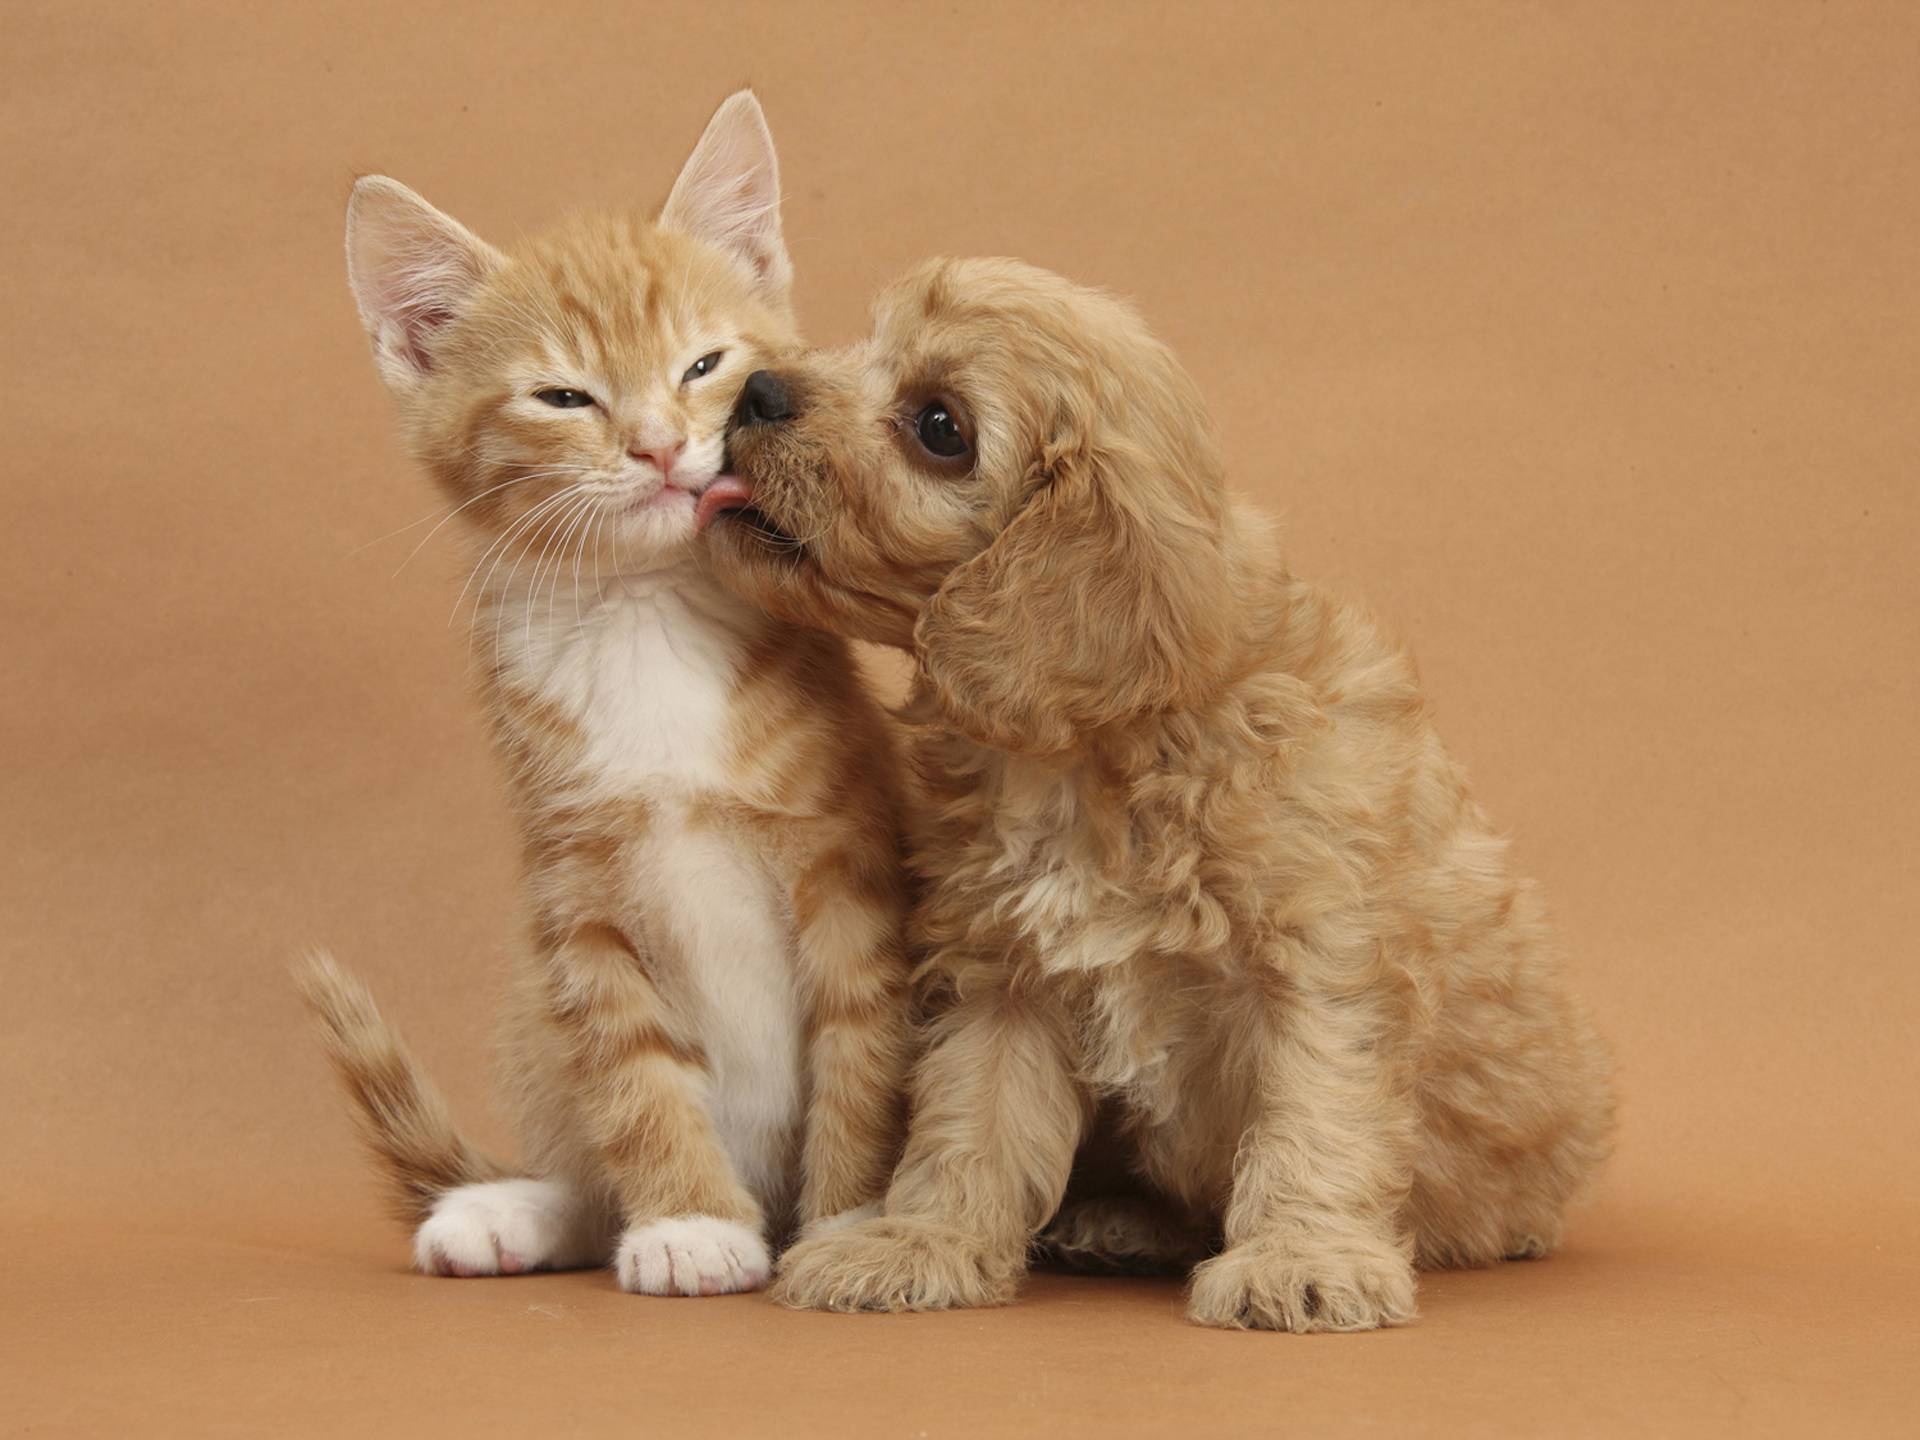 Goede 48+] Cute Puppy and Kitten Wallpapers on WallpaperSafari OG-95